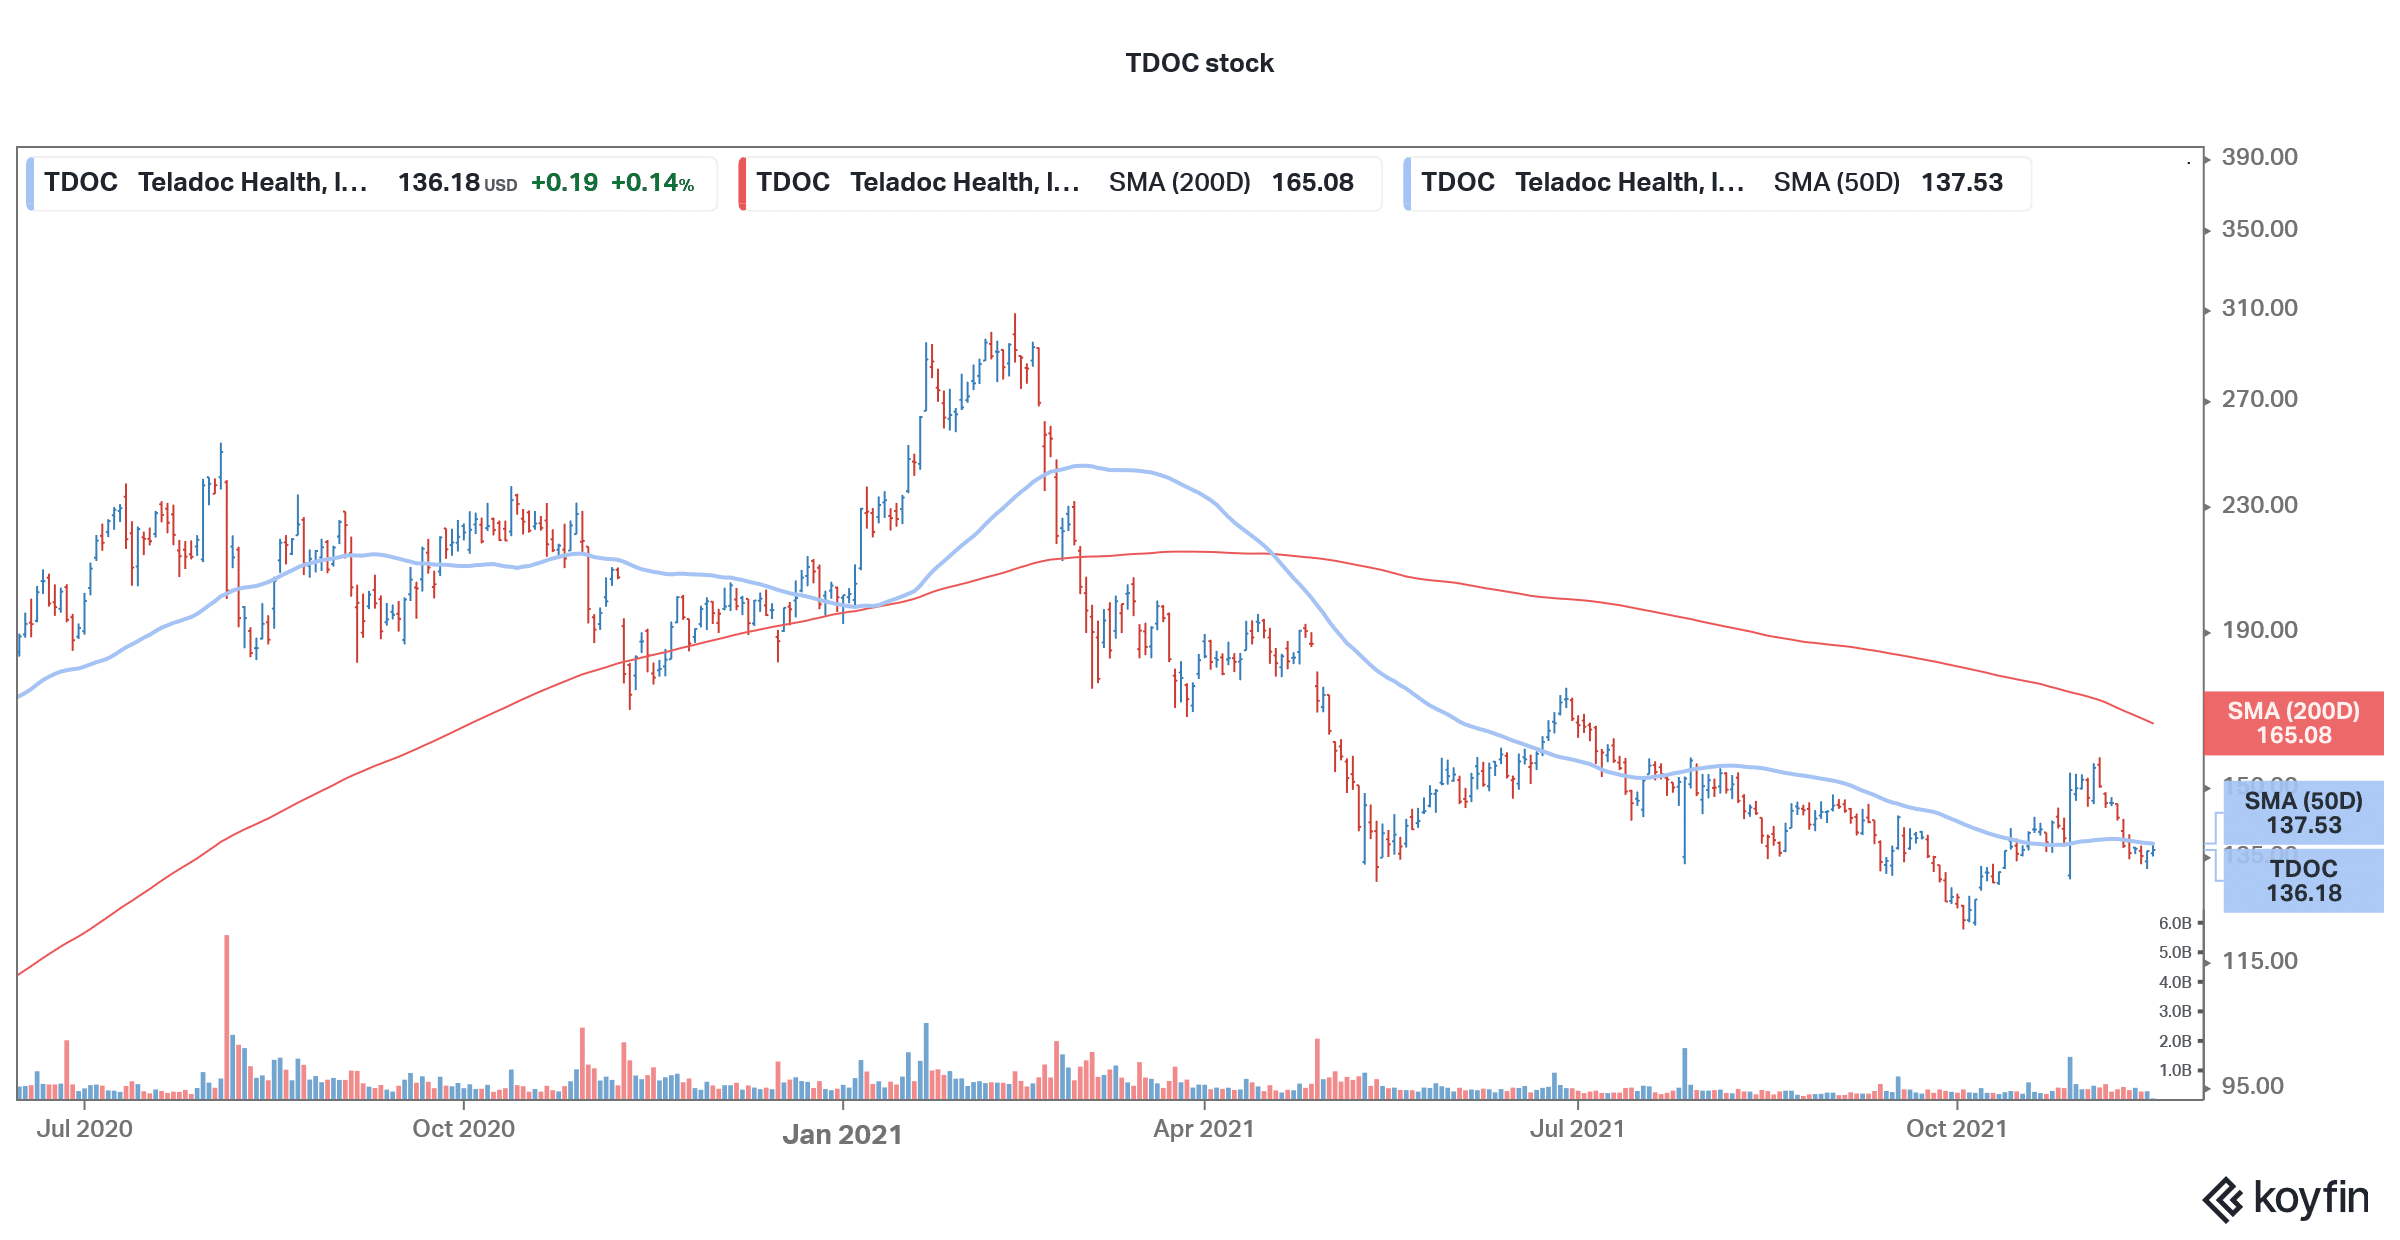 TDOC is a good healthcare stock to buy